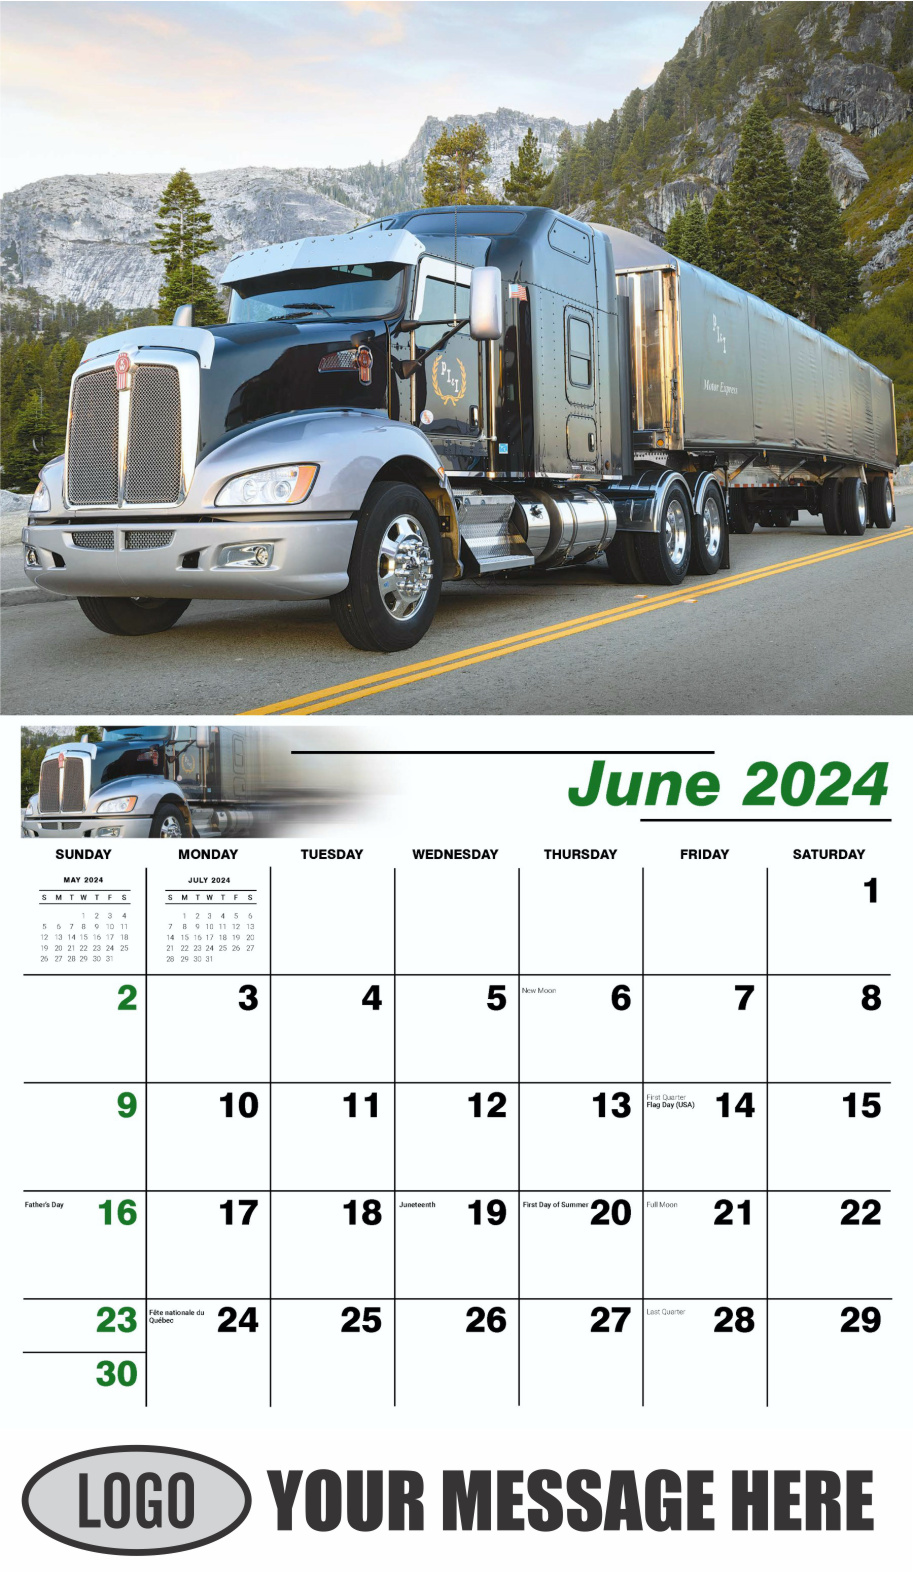 Kings of the Road 2024 Automotive Business Promotional Calendar - June